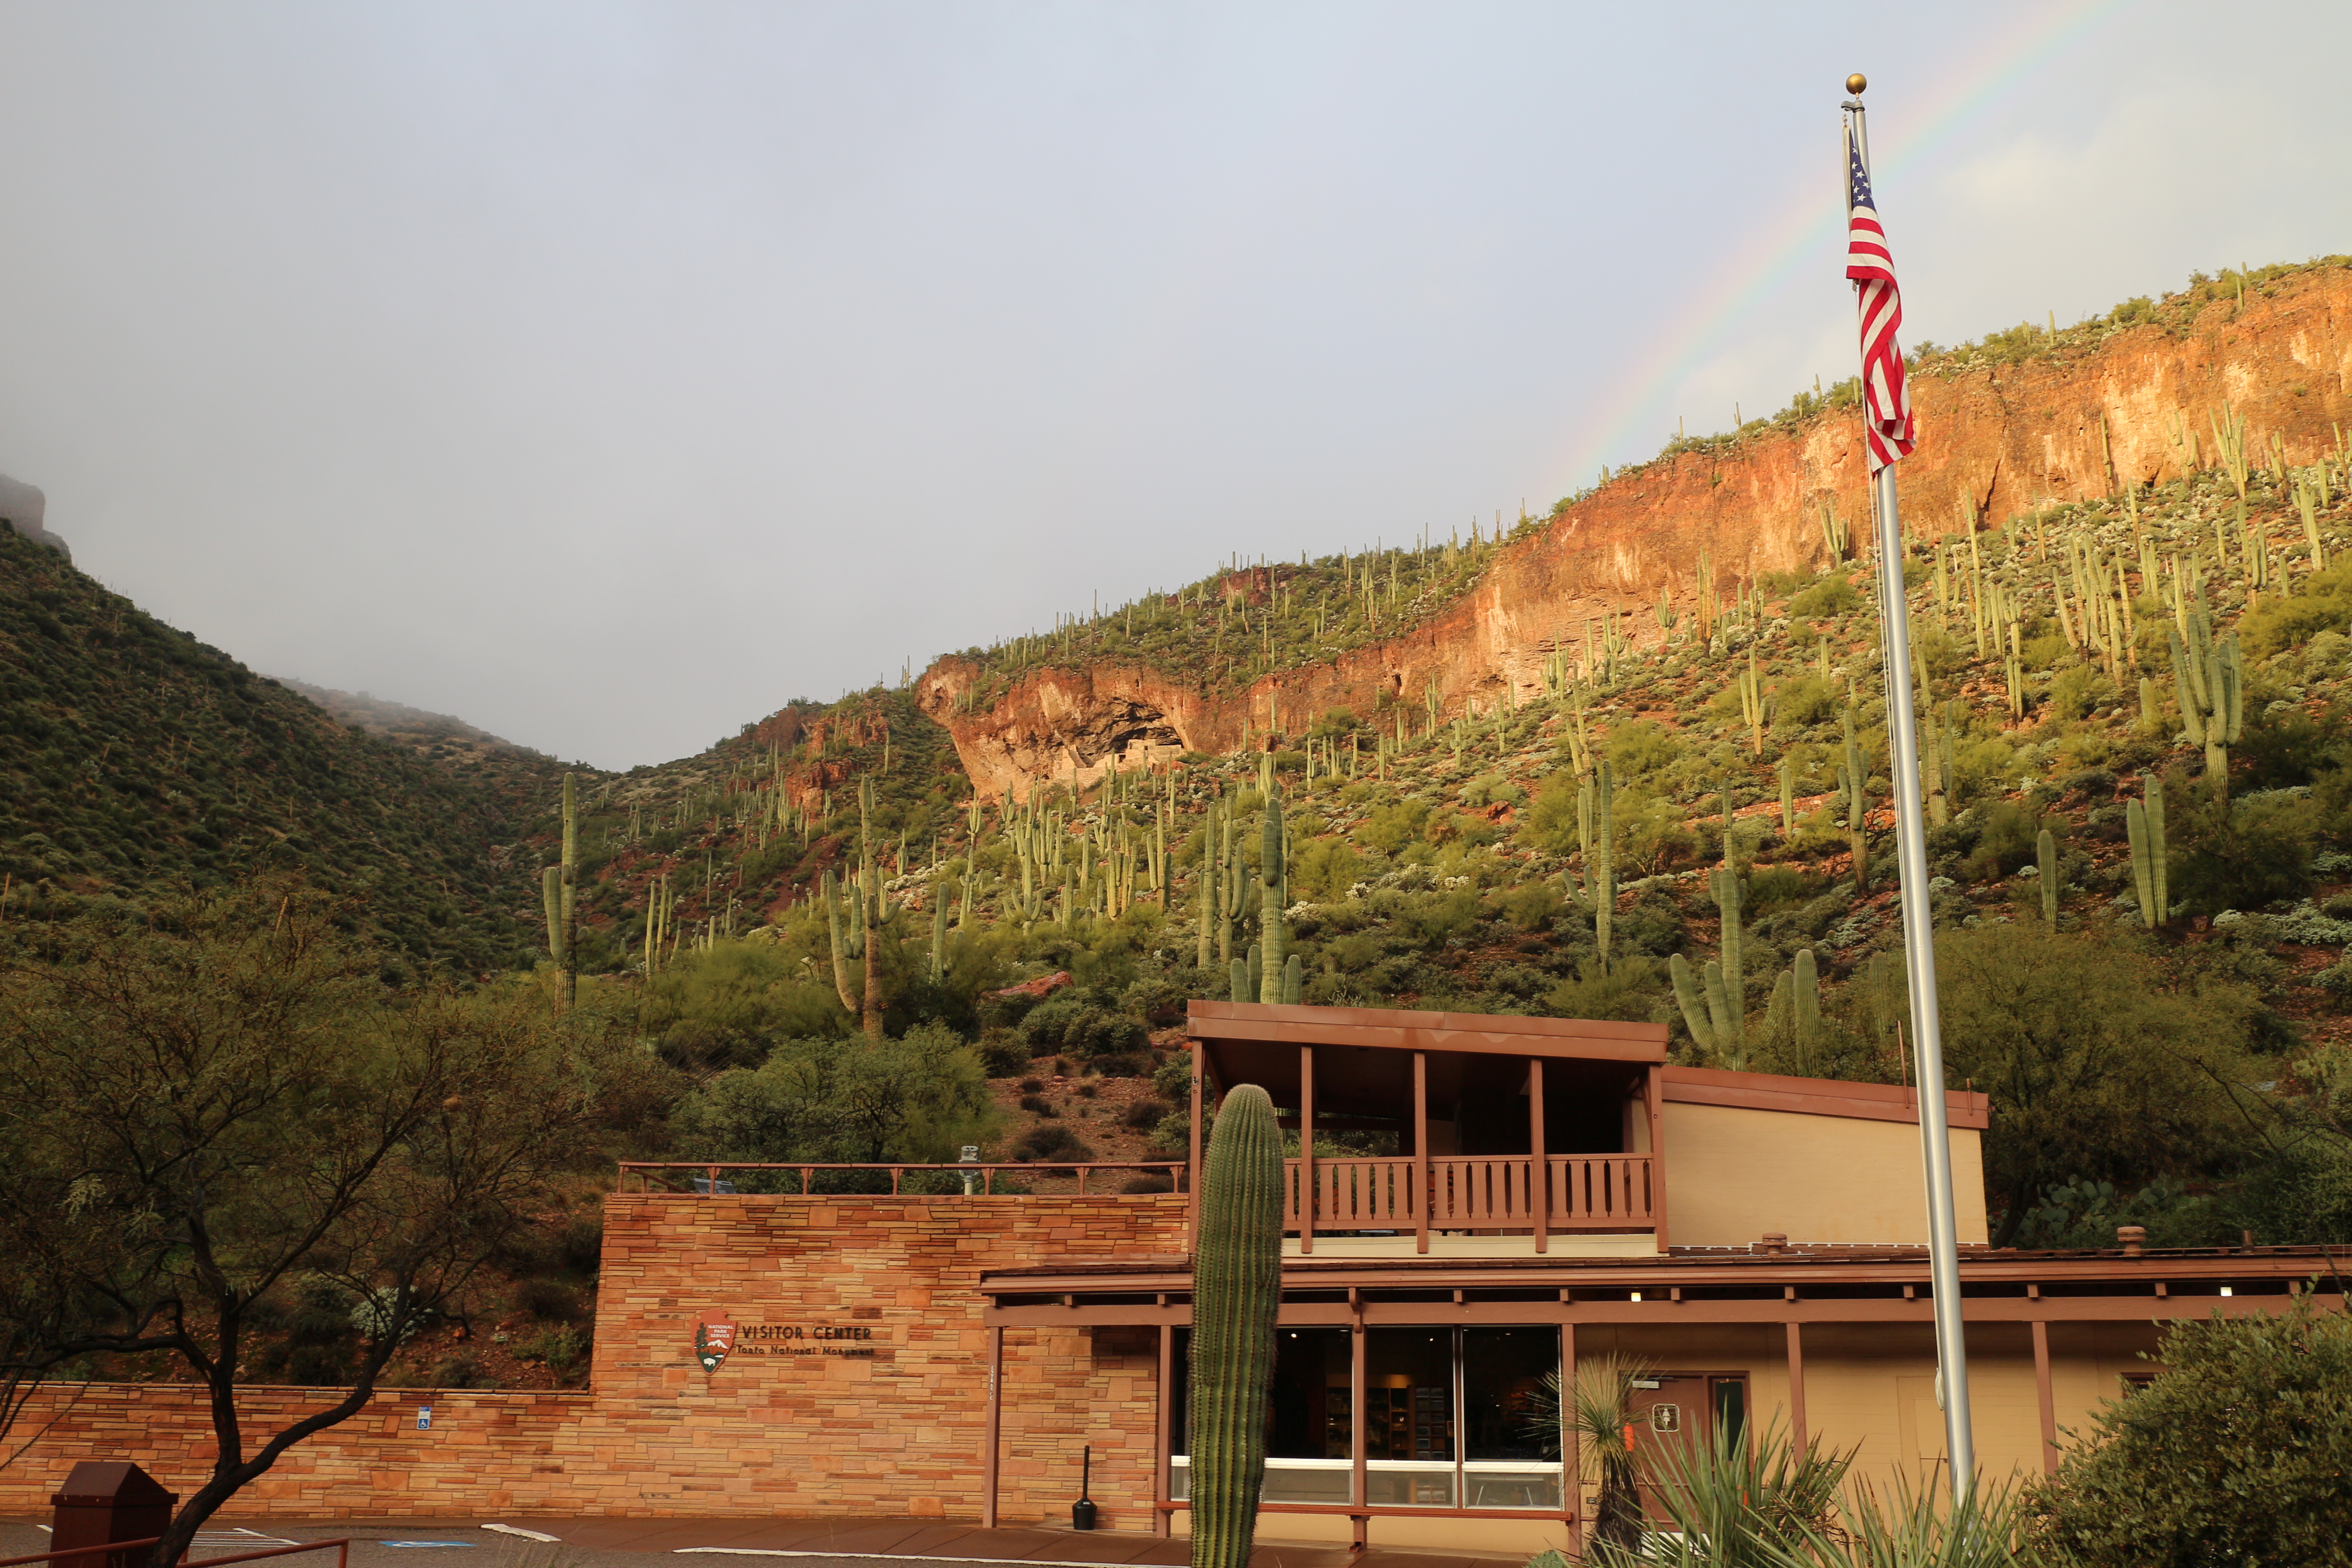 Visitor Center with cliff dwelling and a rainbow in the background.